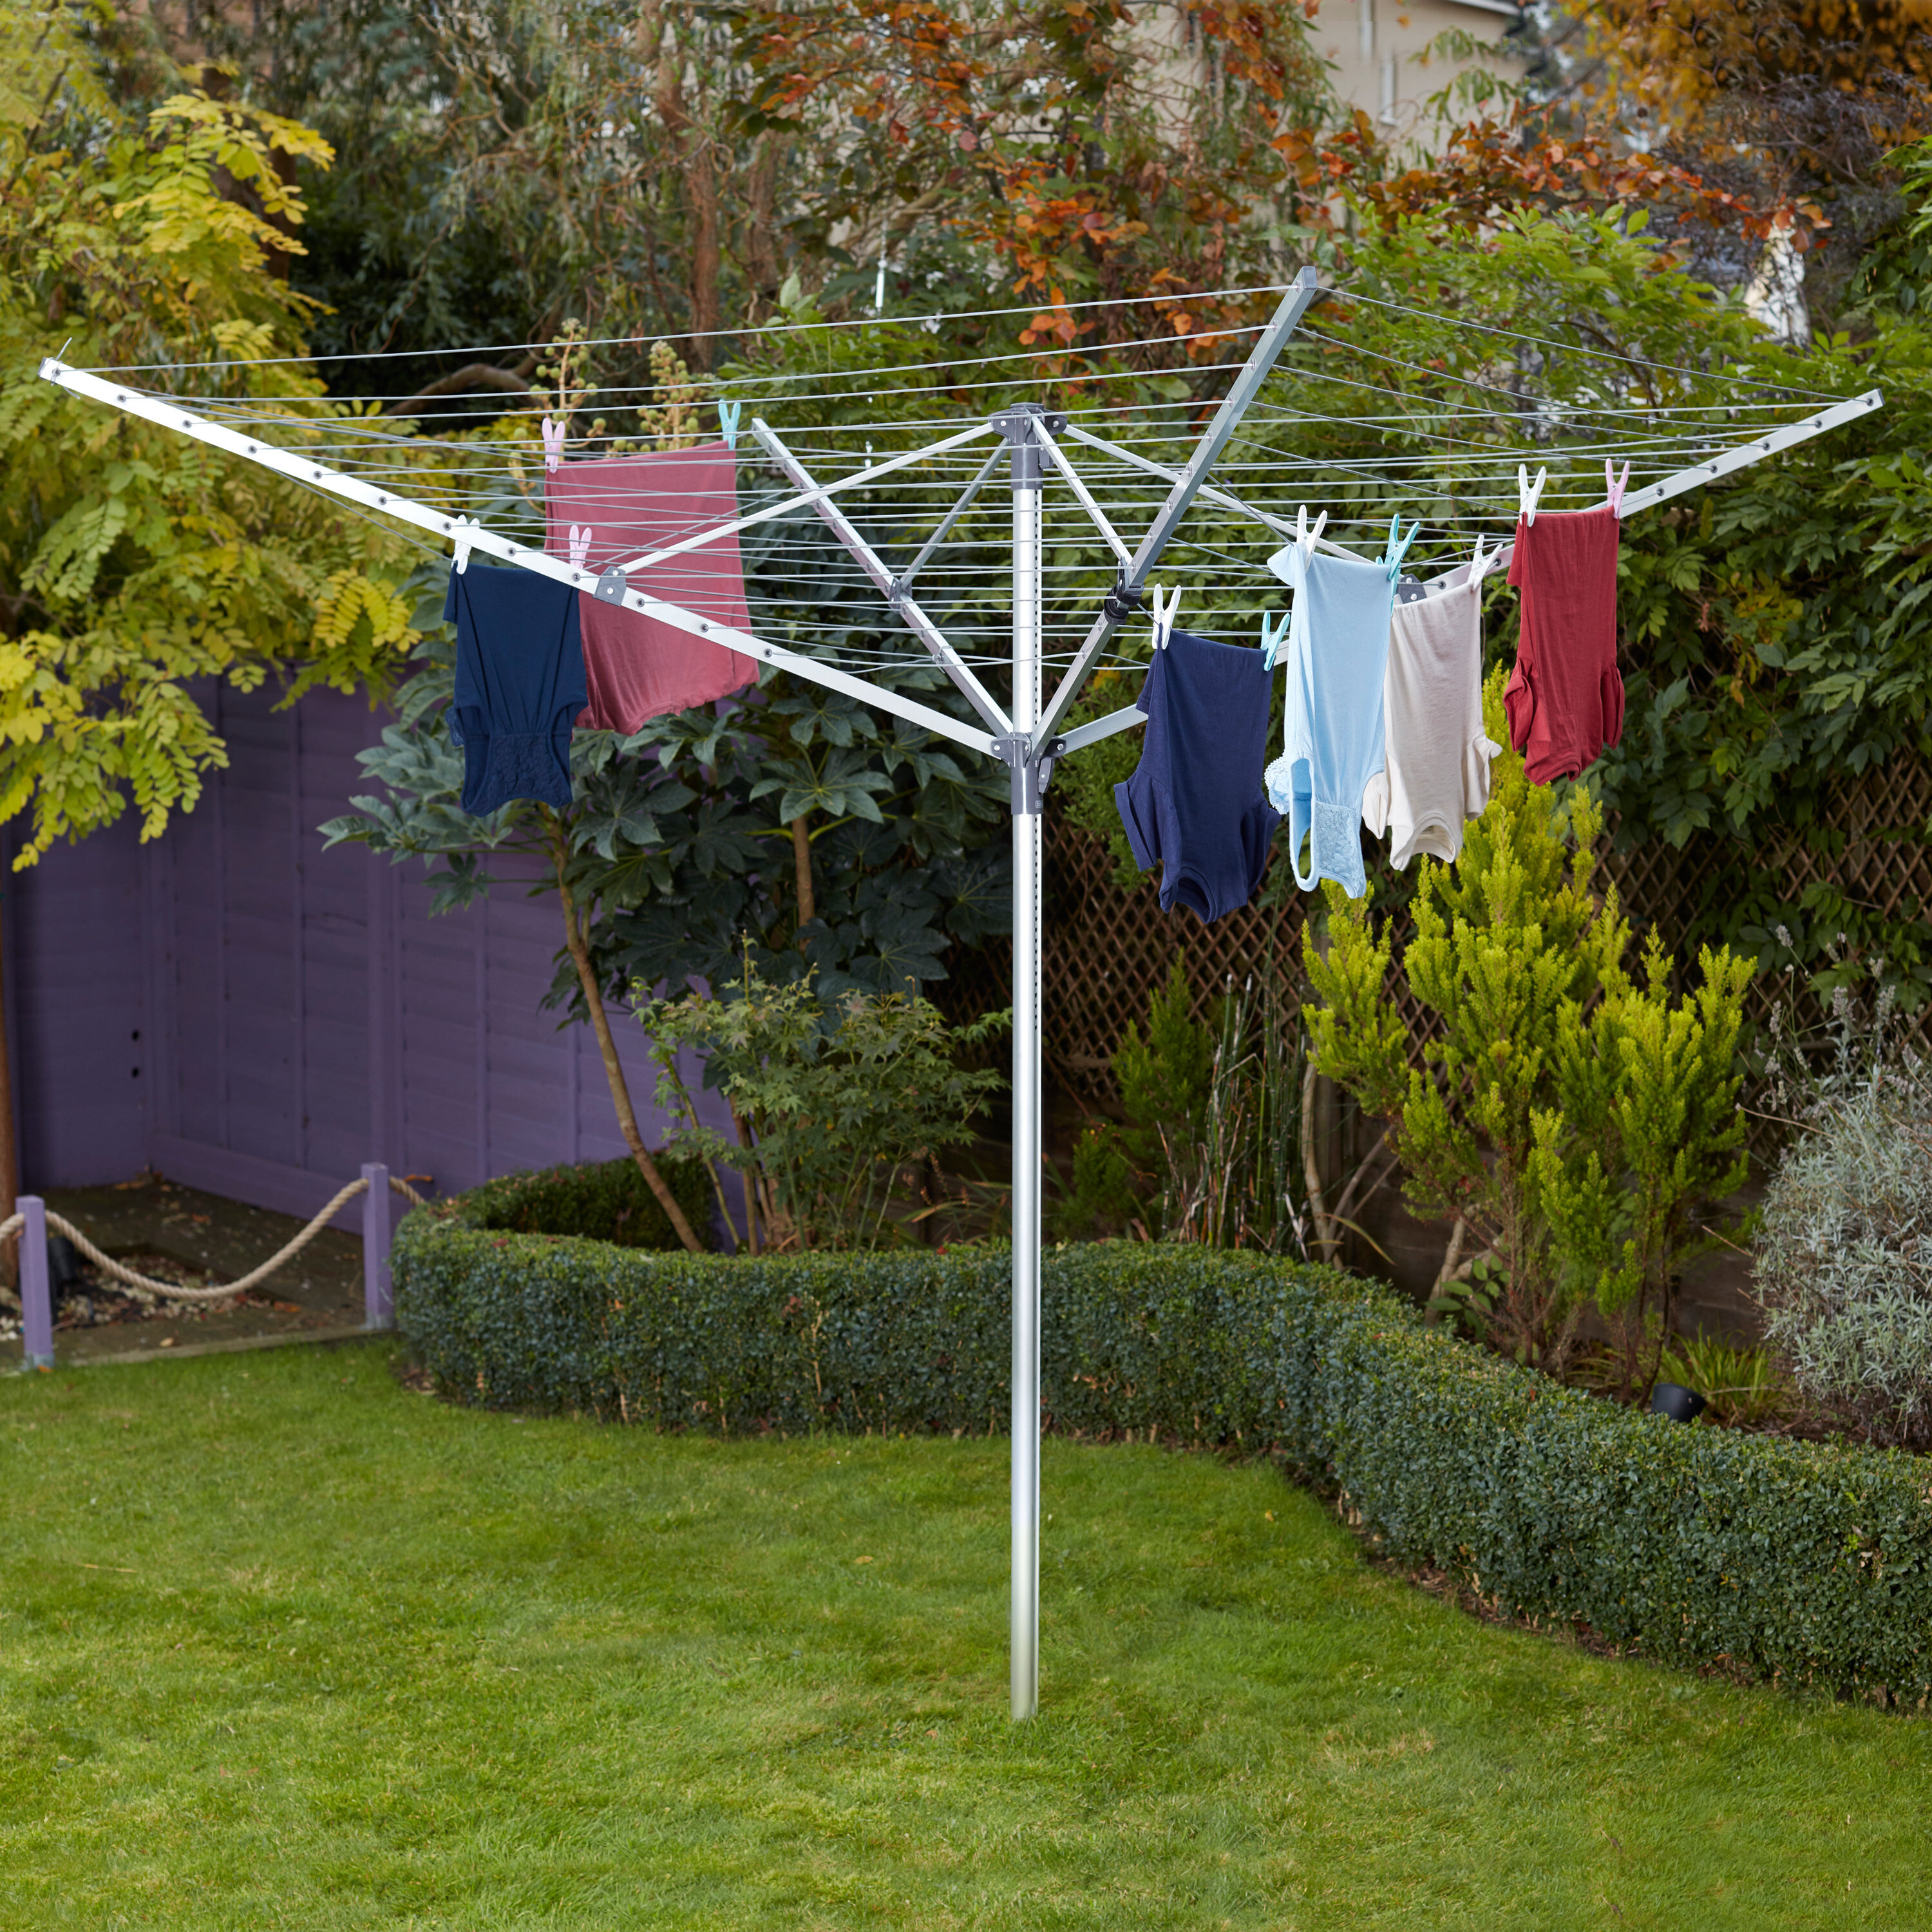 Innotic Rotary Airer 4-arm 50m Washing Line Umbrella-Shape Drying ClothesLine Folding Standing Laundry Rack with Spike for Outdoor Garden